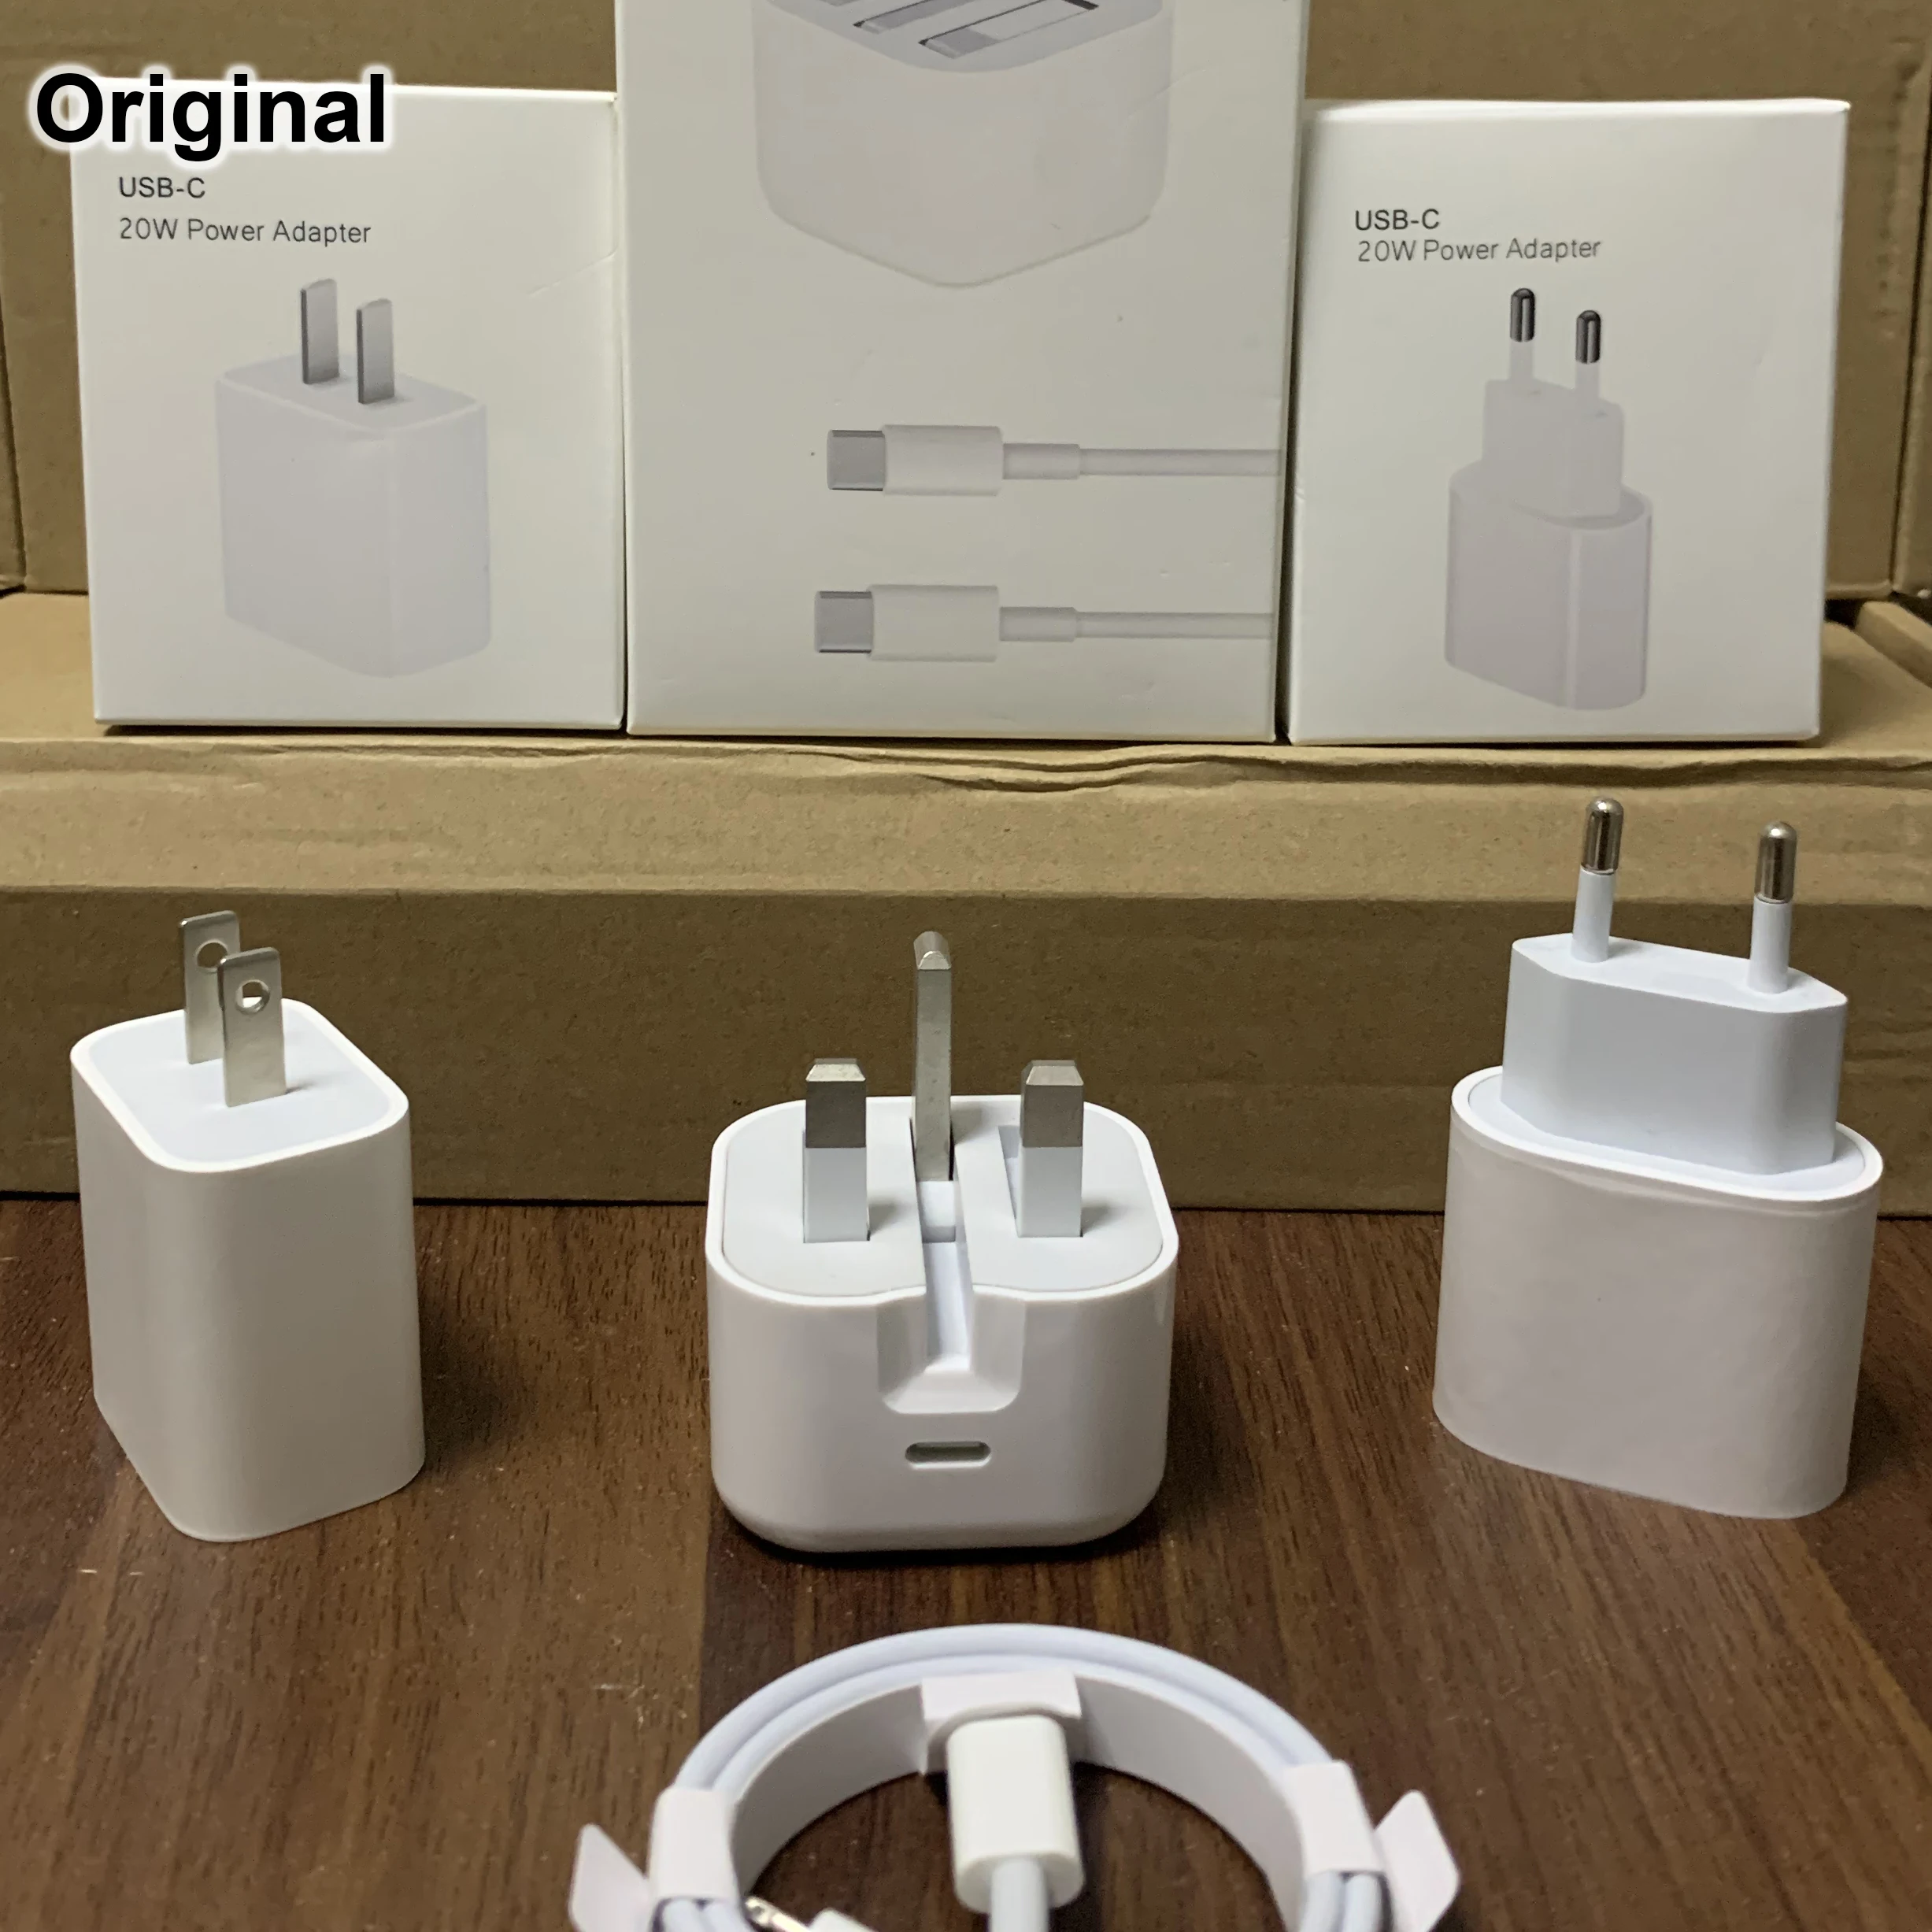 

EU UK US Universal 20W Power PD Fast USB C Power Adapter Wall Charger C94 18W USB-C Type C Cable For Apple iPhone X 11 12 pro